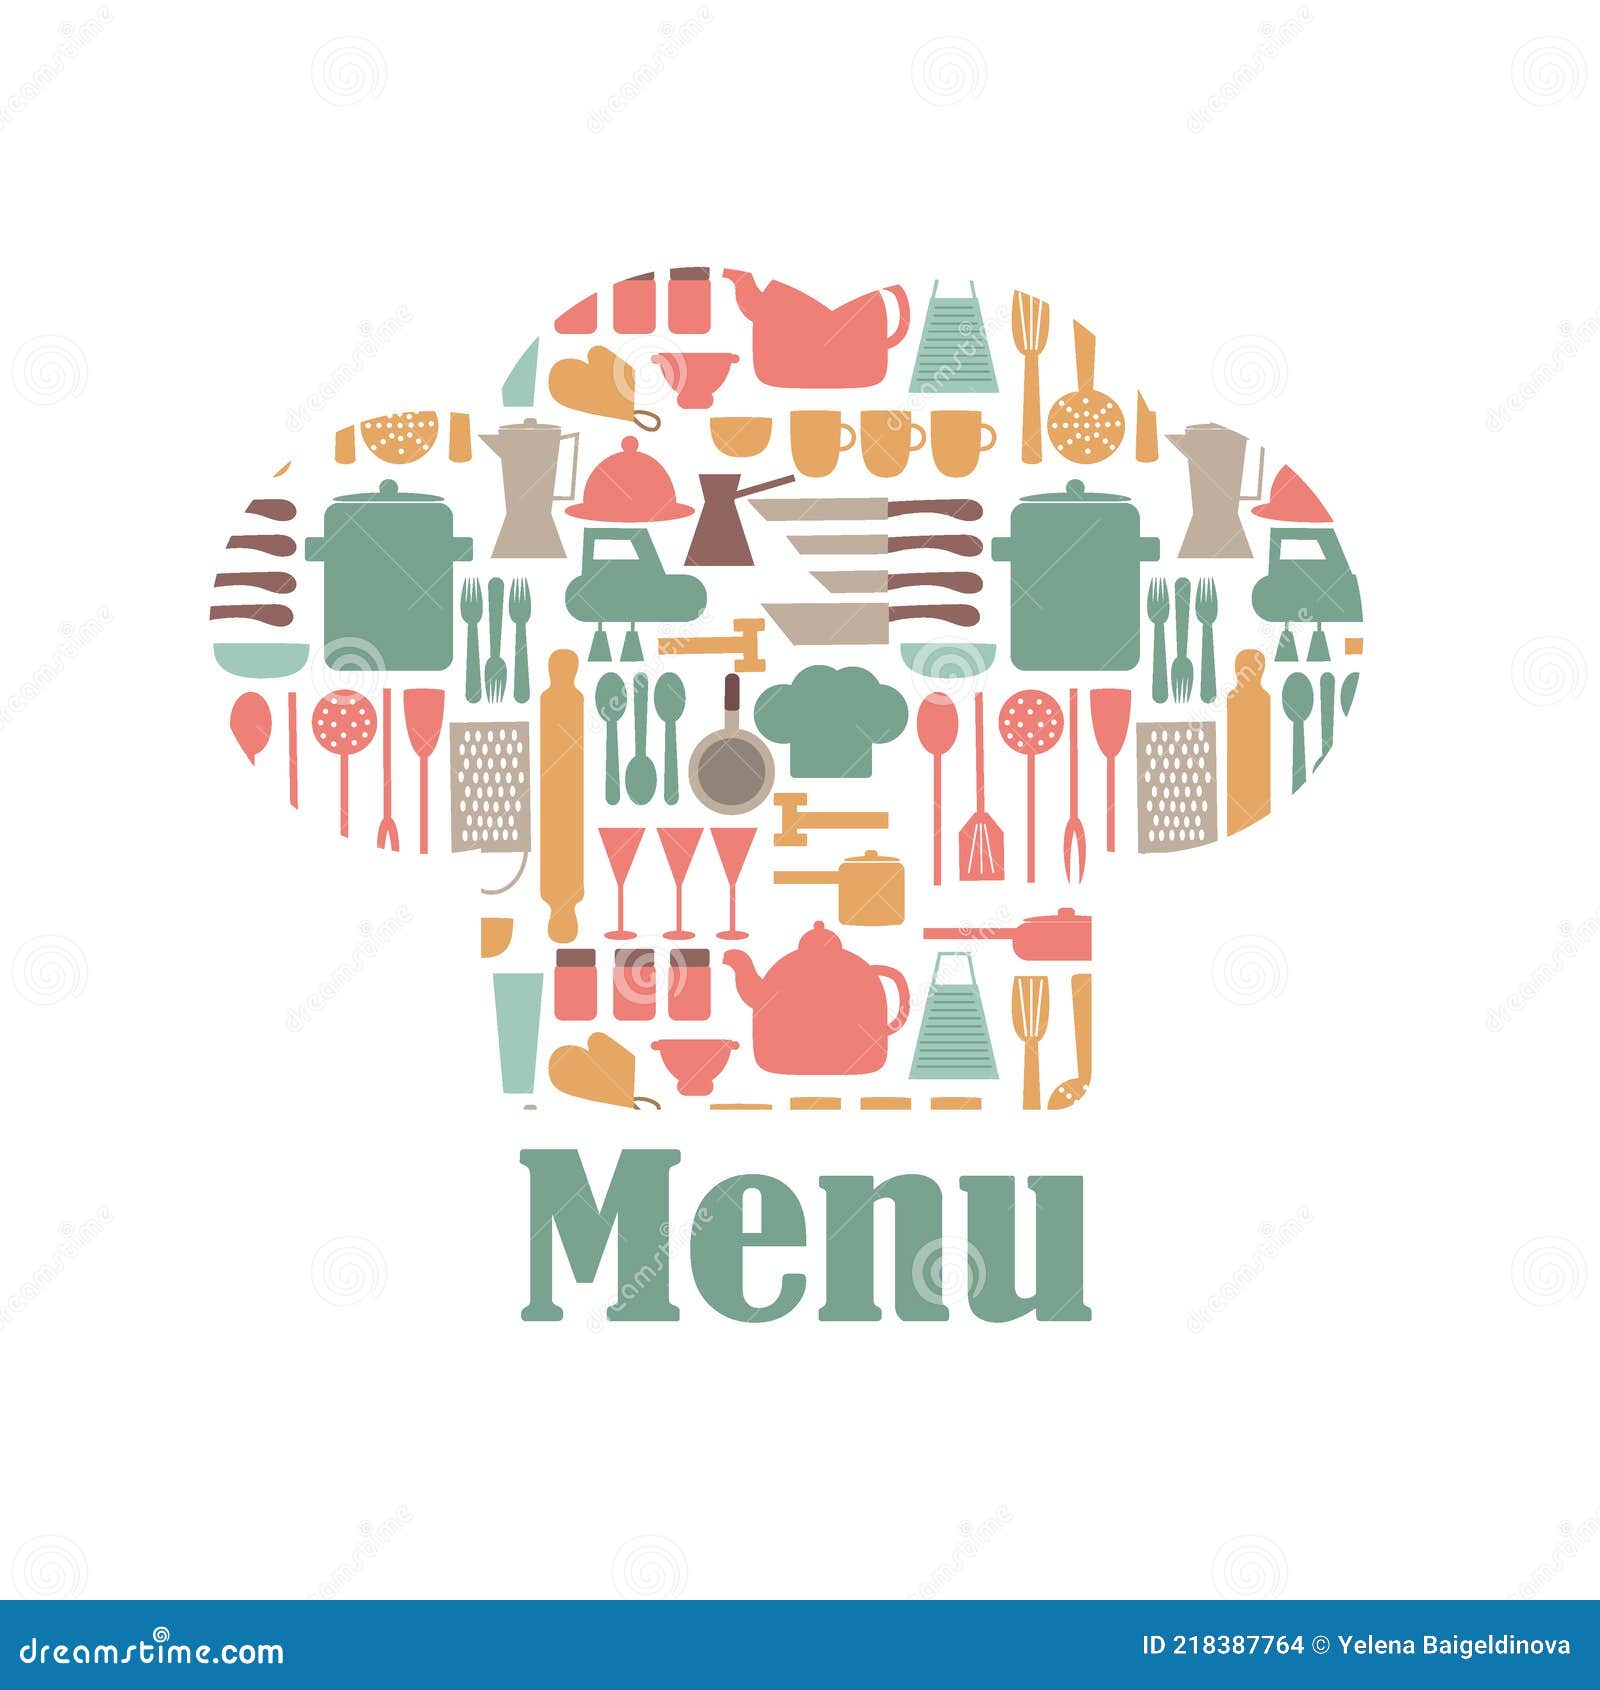 Chefs Choice Stamp Stock Illustration - Download Image Now